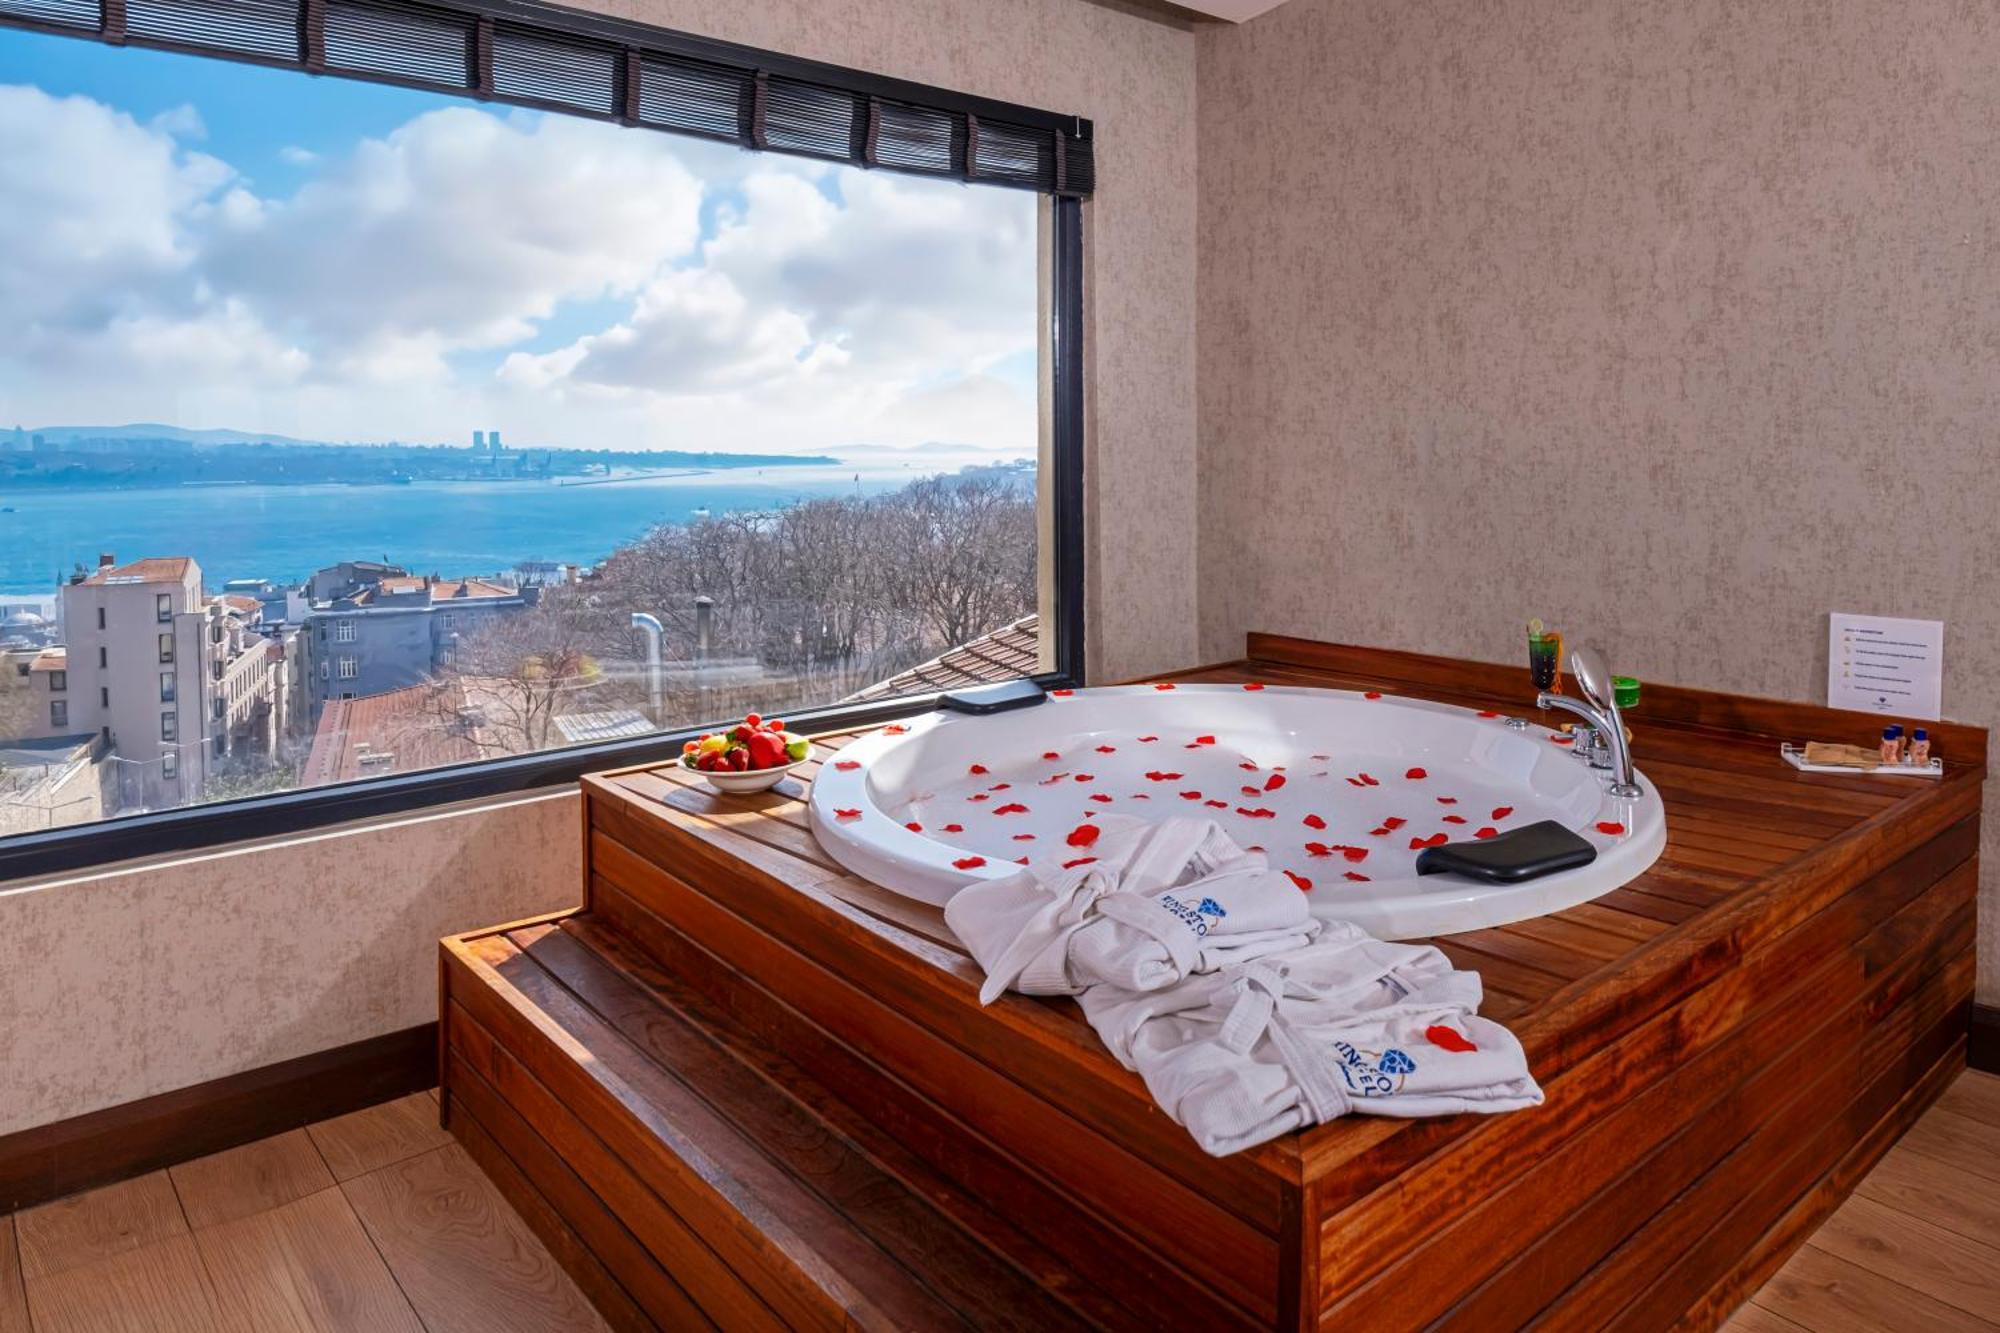 Ring Stone Hotels Bosphorus - Special Class Istambul Extérieur photo